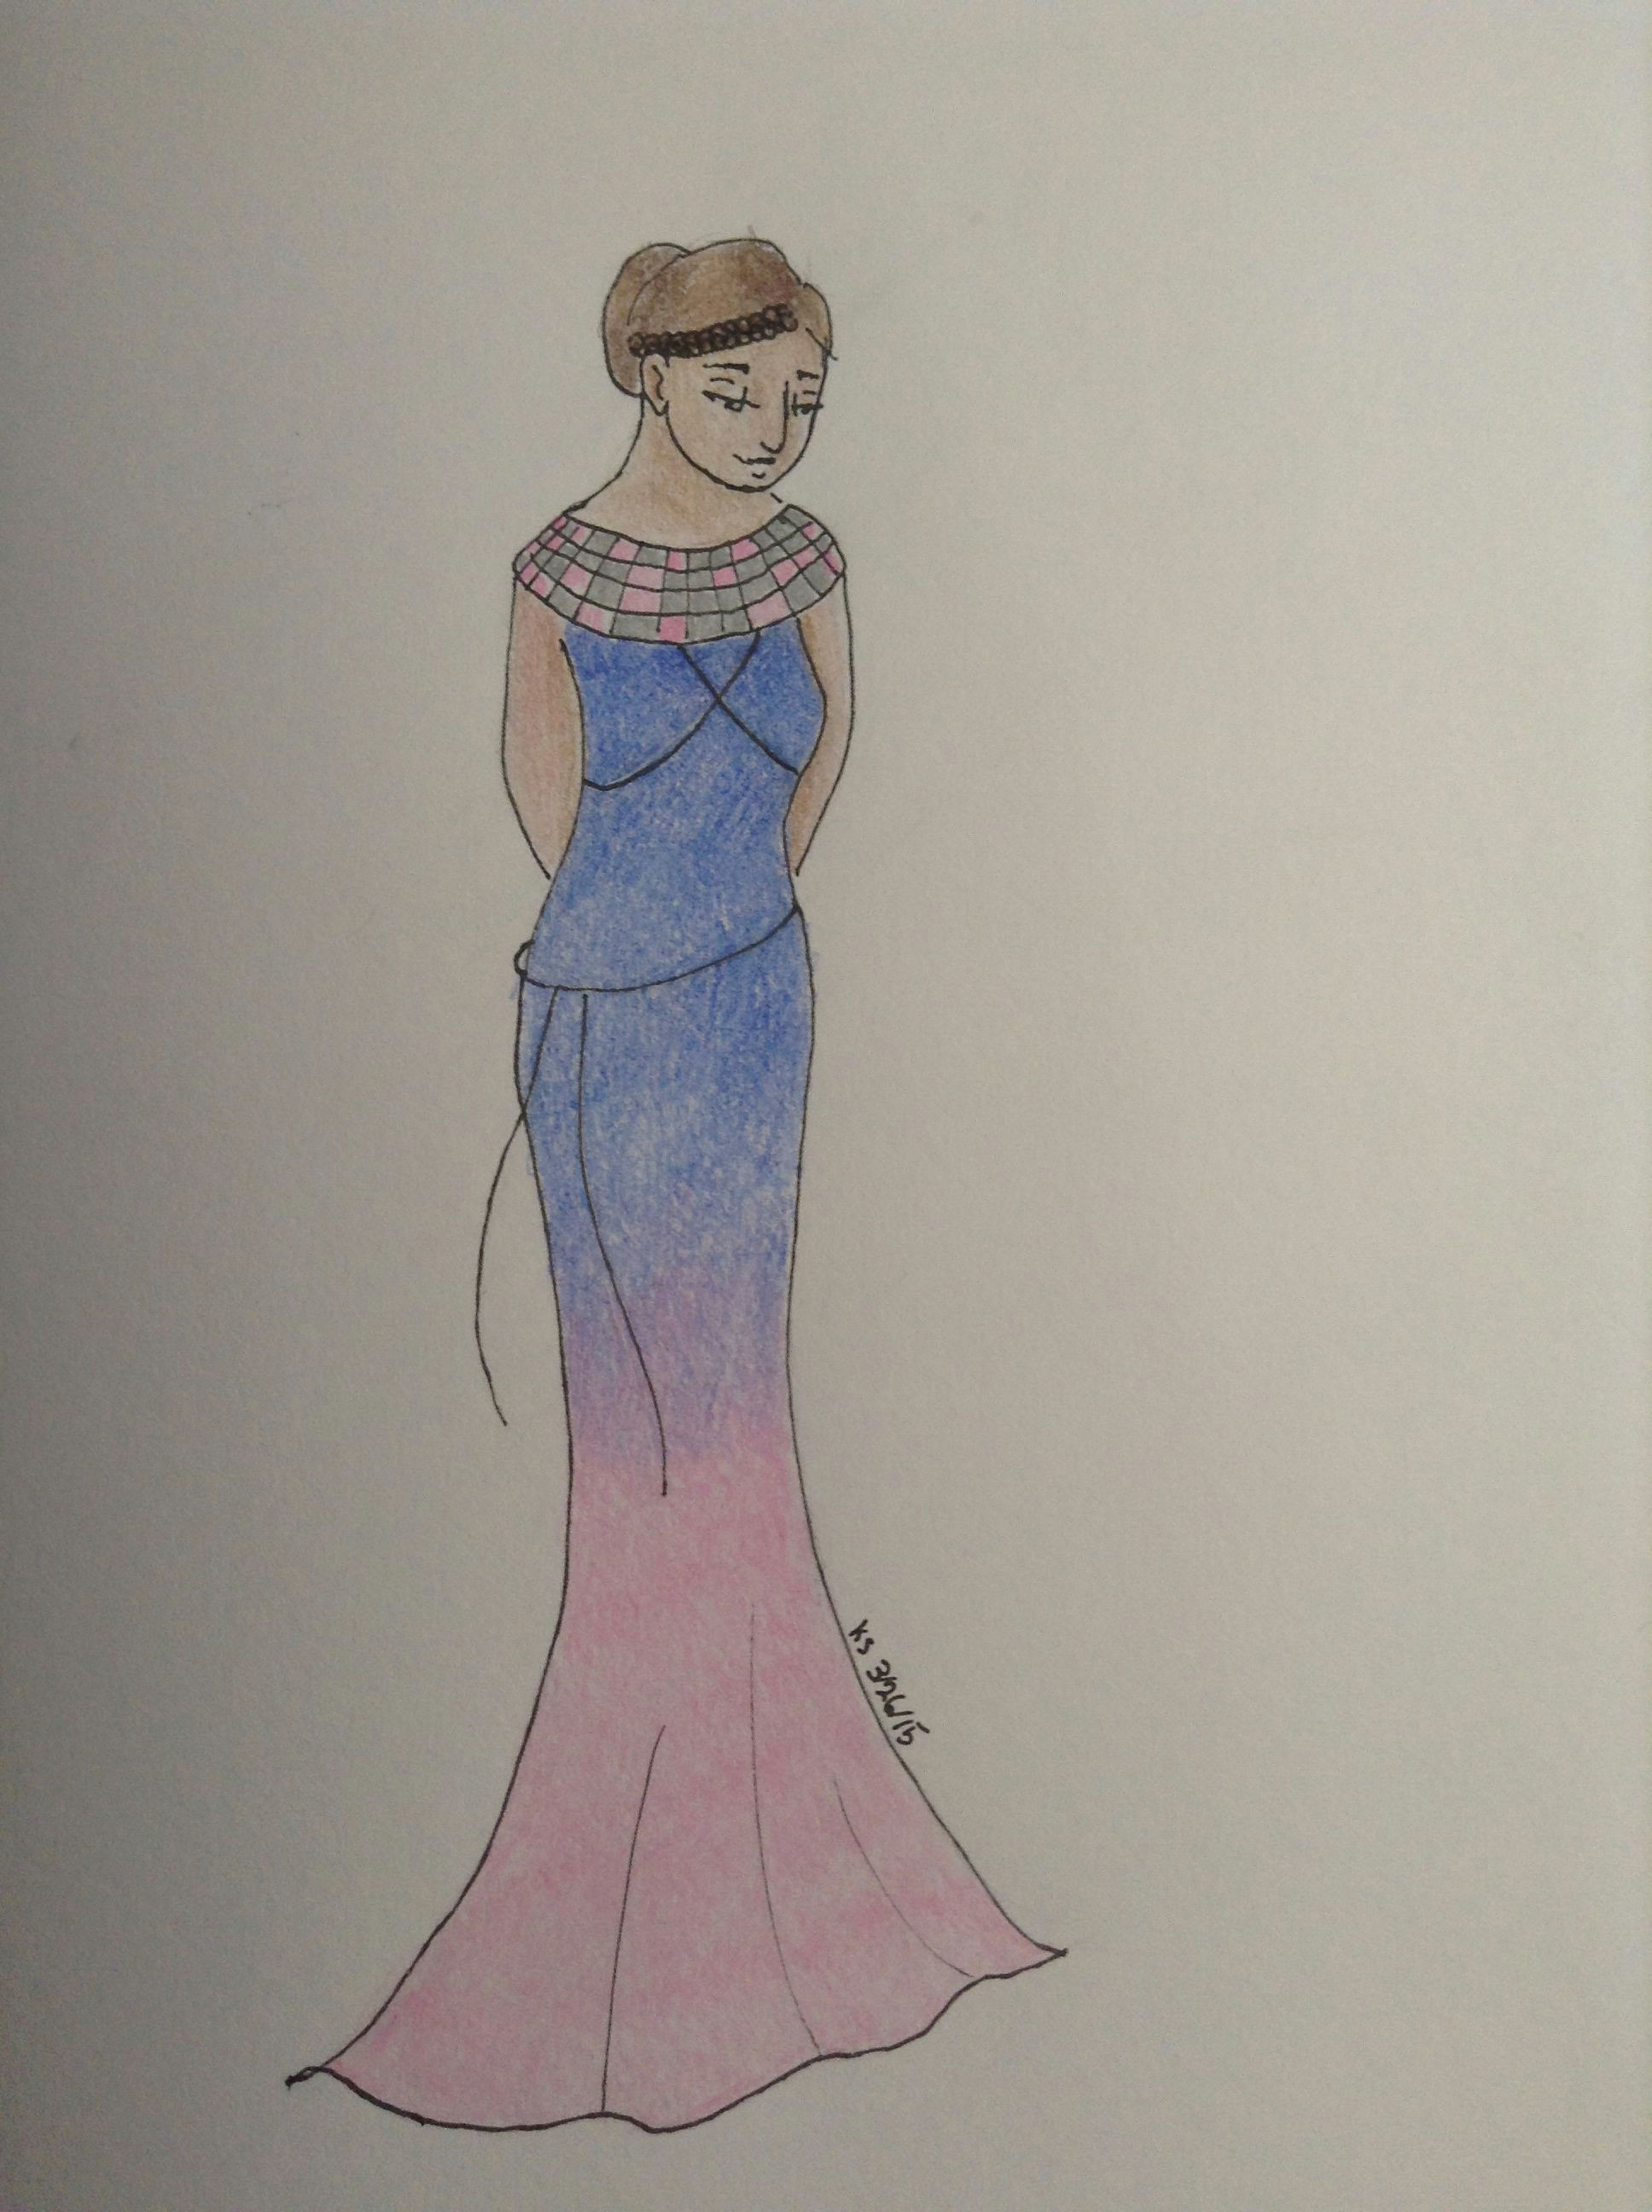 Drawing Of A Girl In A Blue Dress A Girl In A Dress I Designed Also Thanks to Those who Helped with